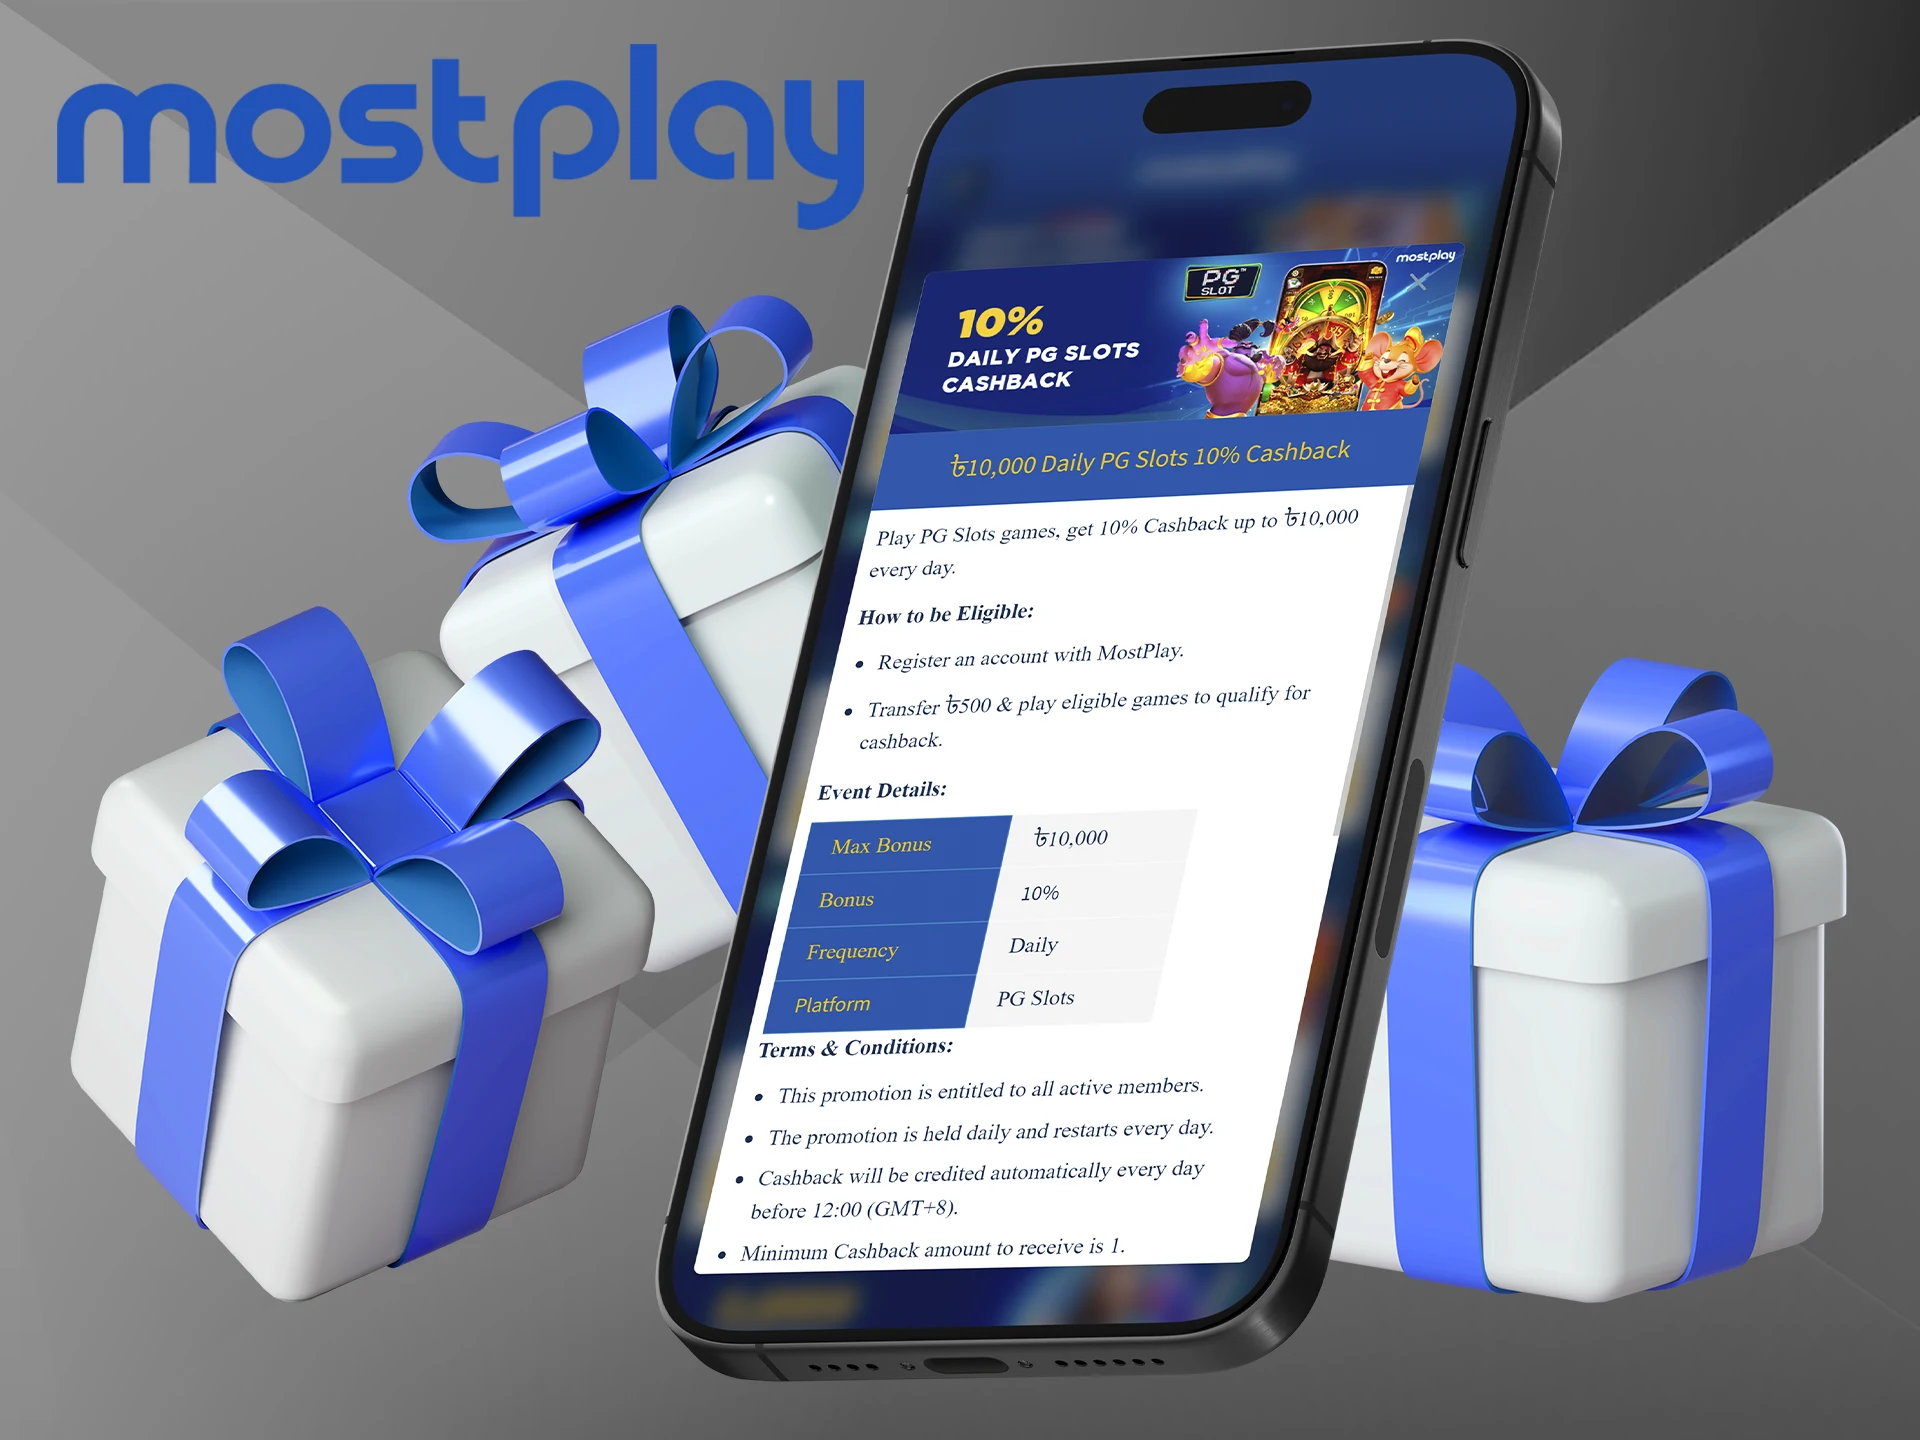 Receive regular cashback on the slot machines from Mostplay.